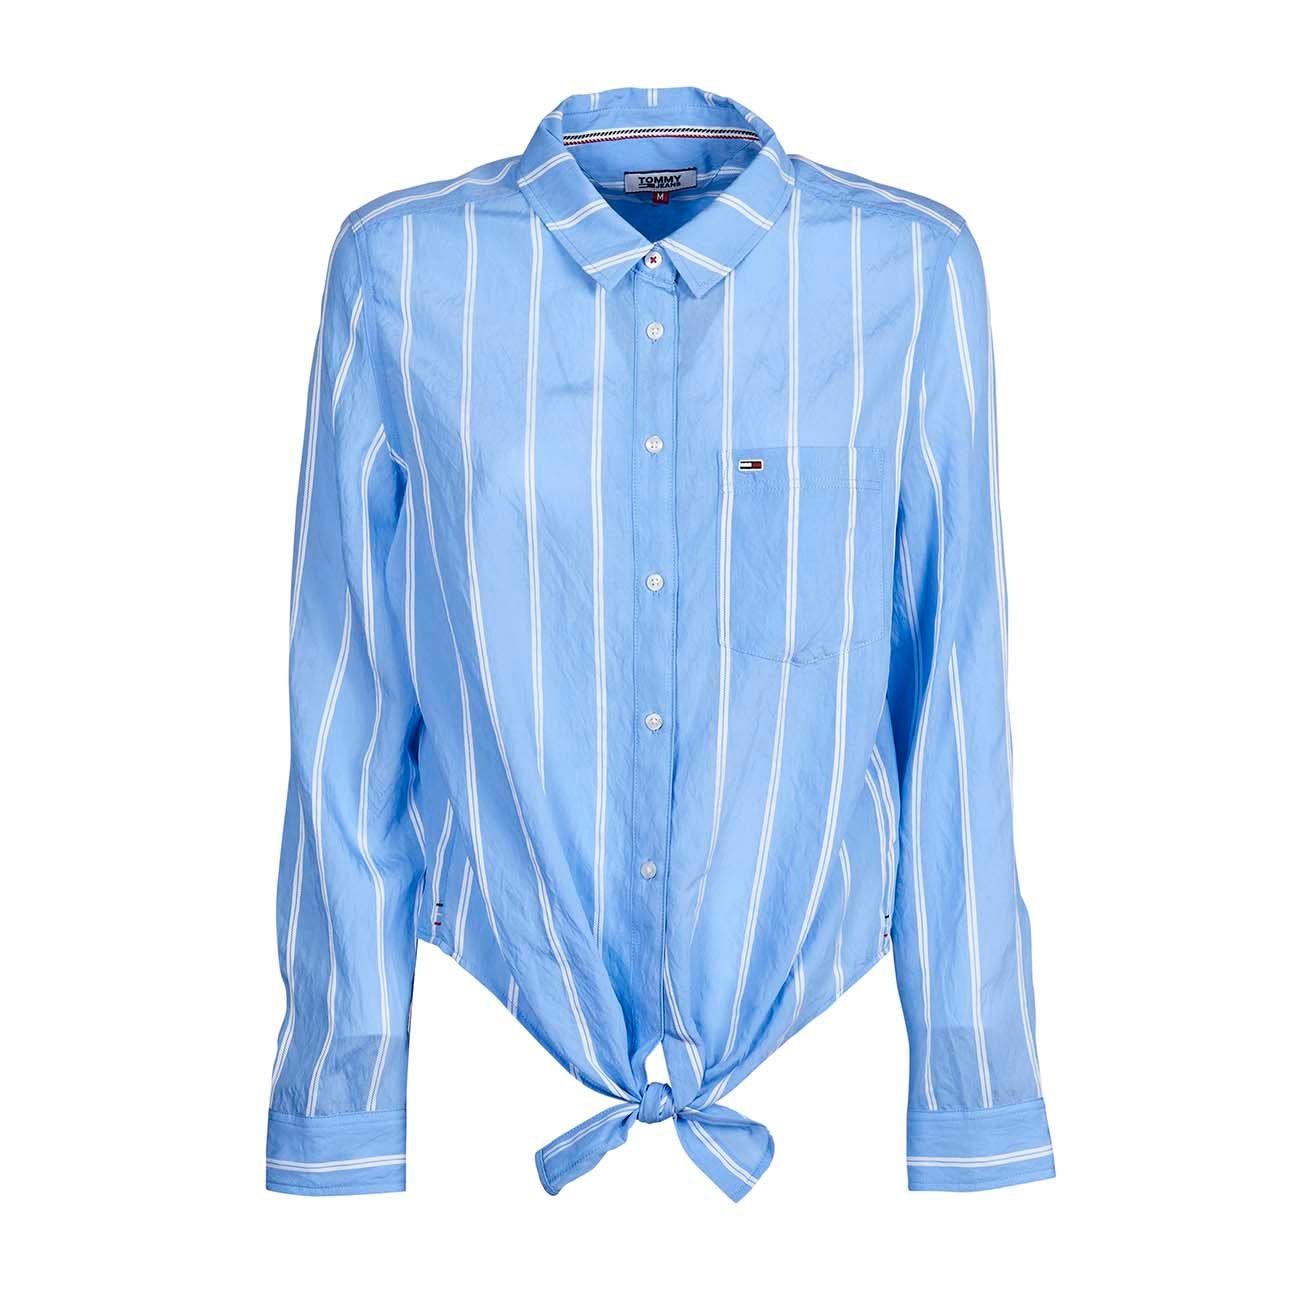 tommy hilfiger blue and white striped shirt